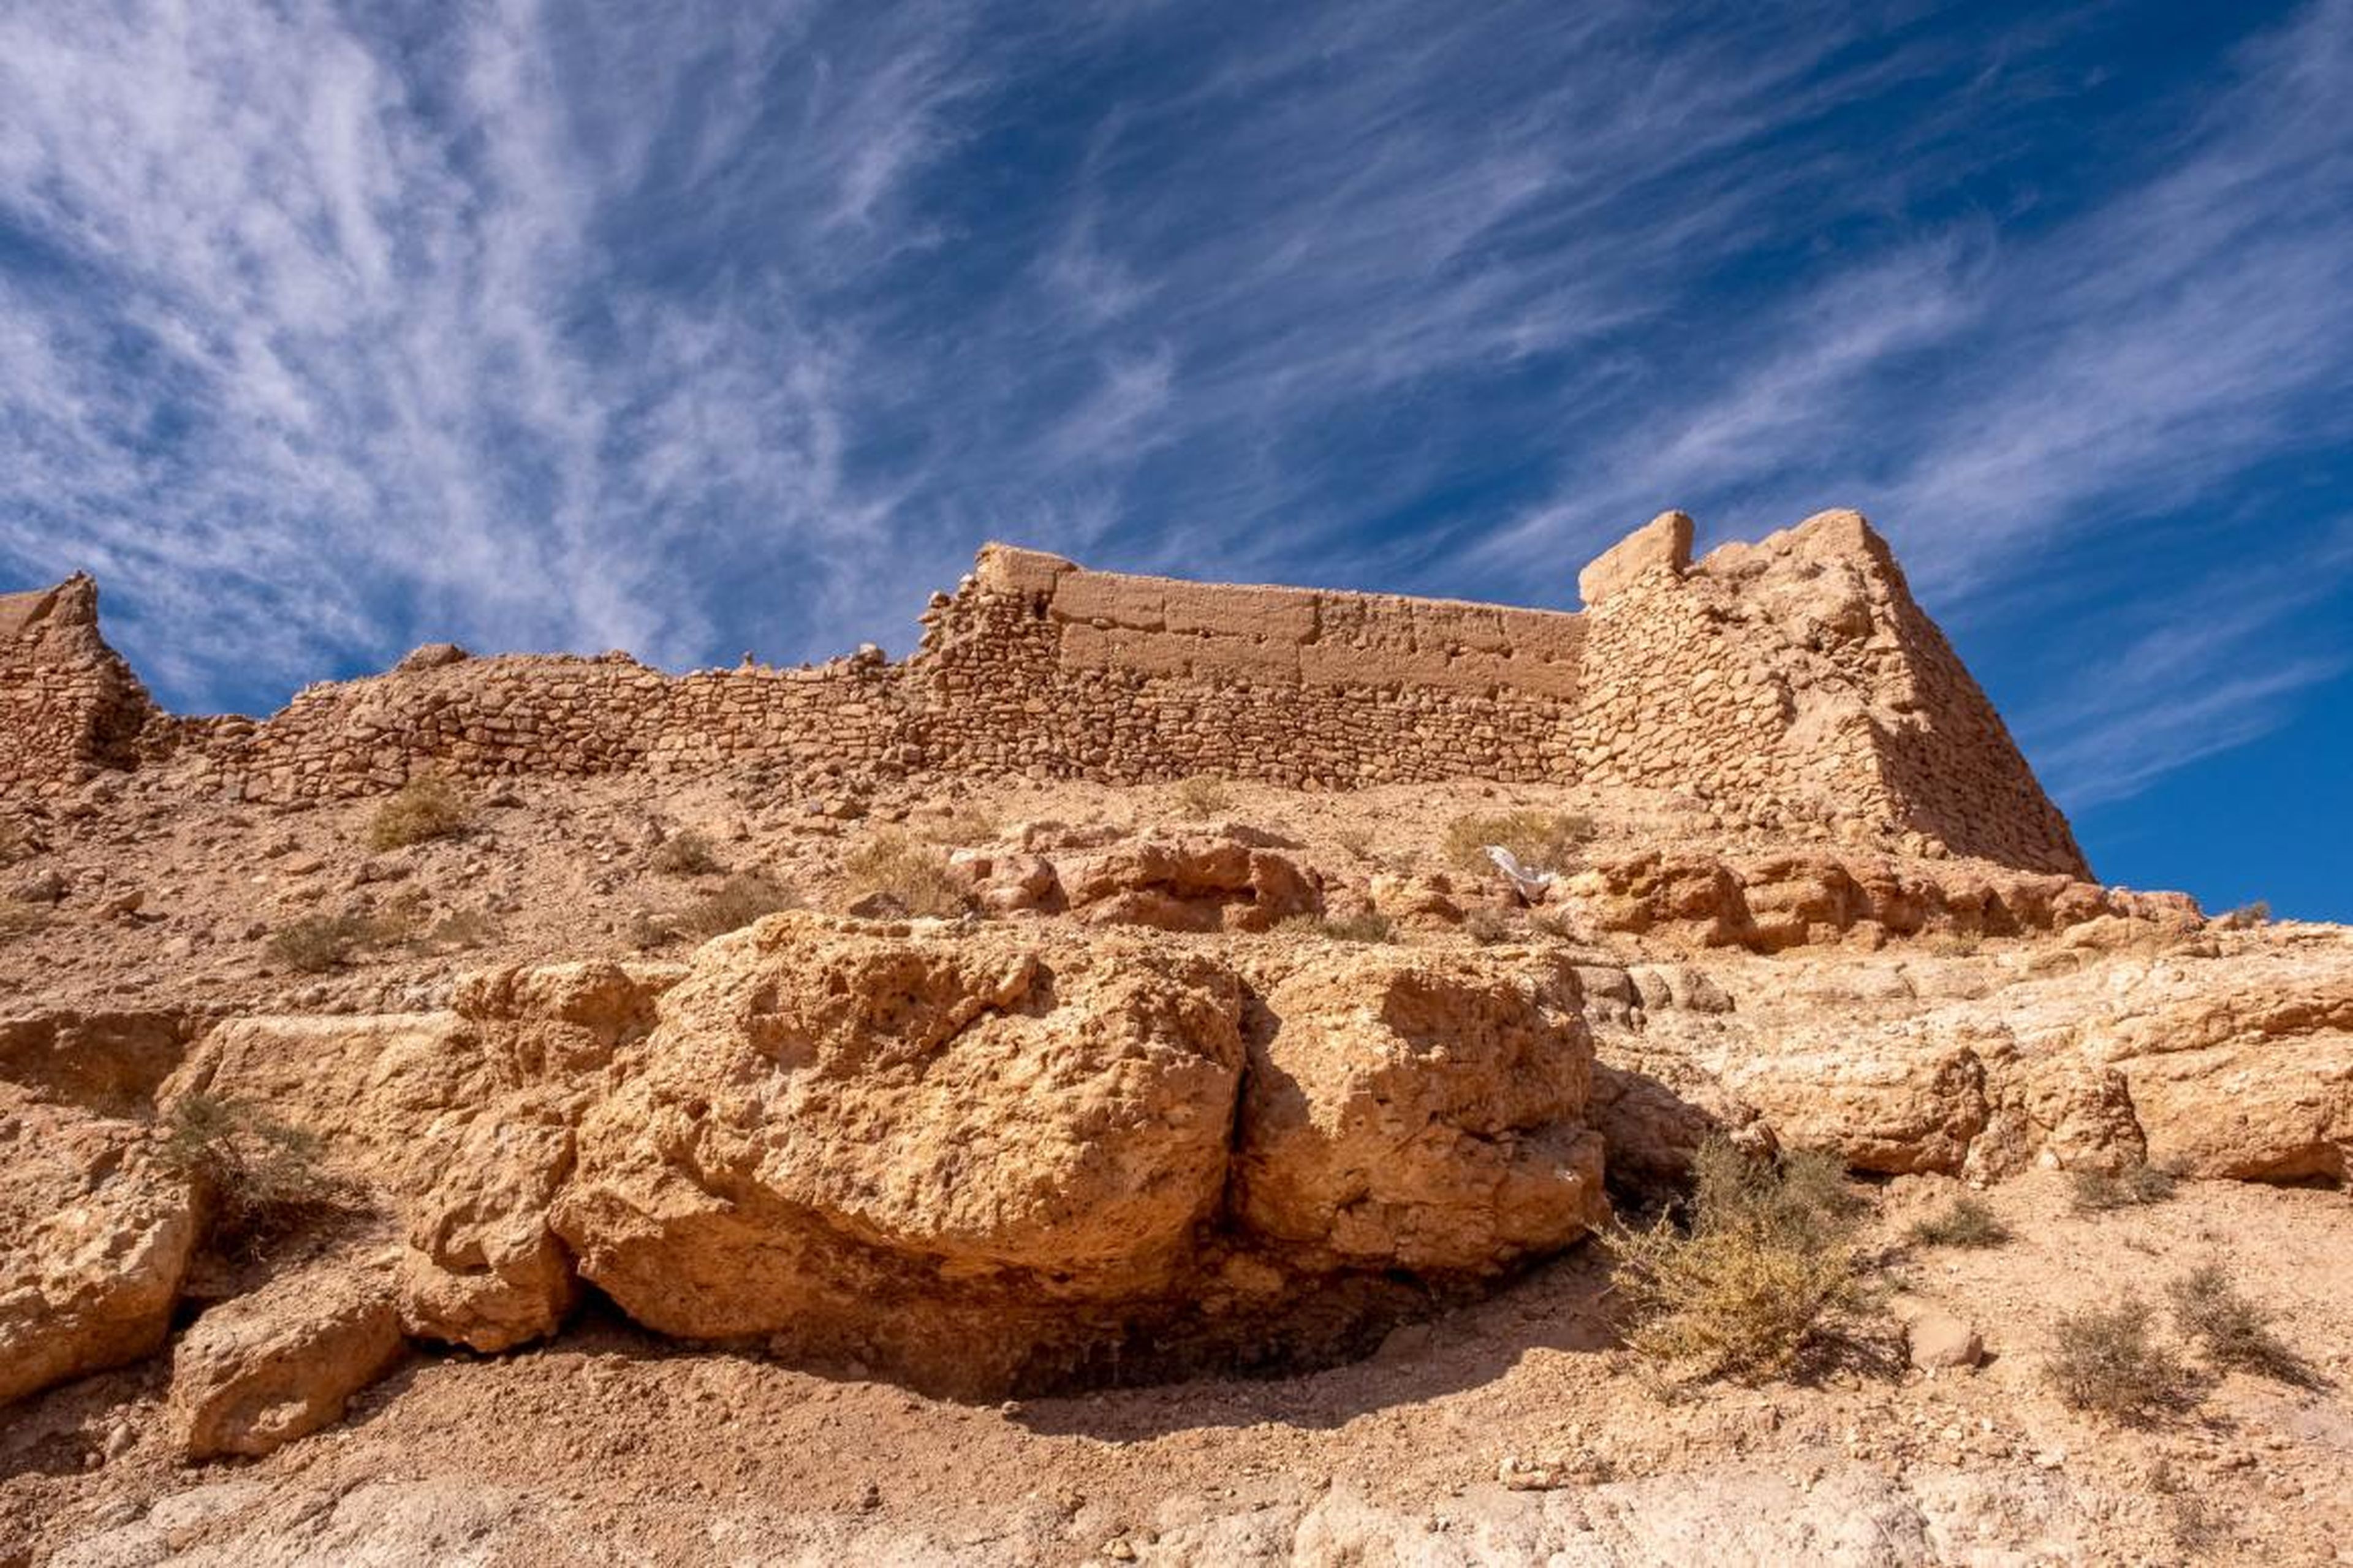 If invaders were to get into the ksar, inhabitants could retreat higher and higher up the walls.